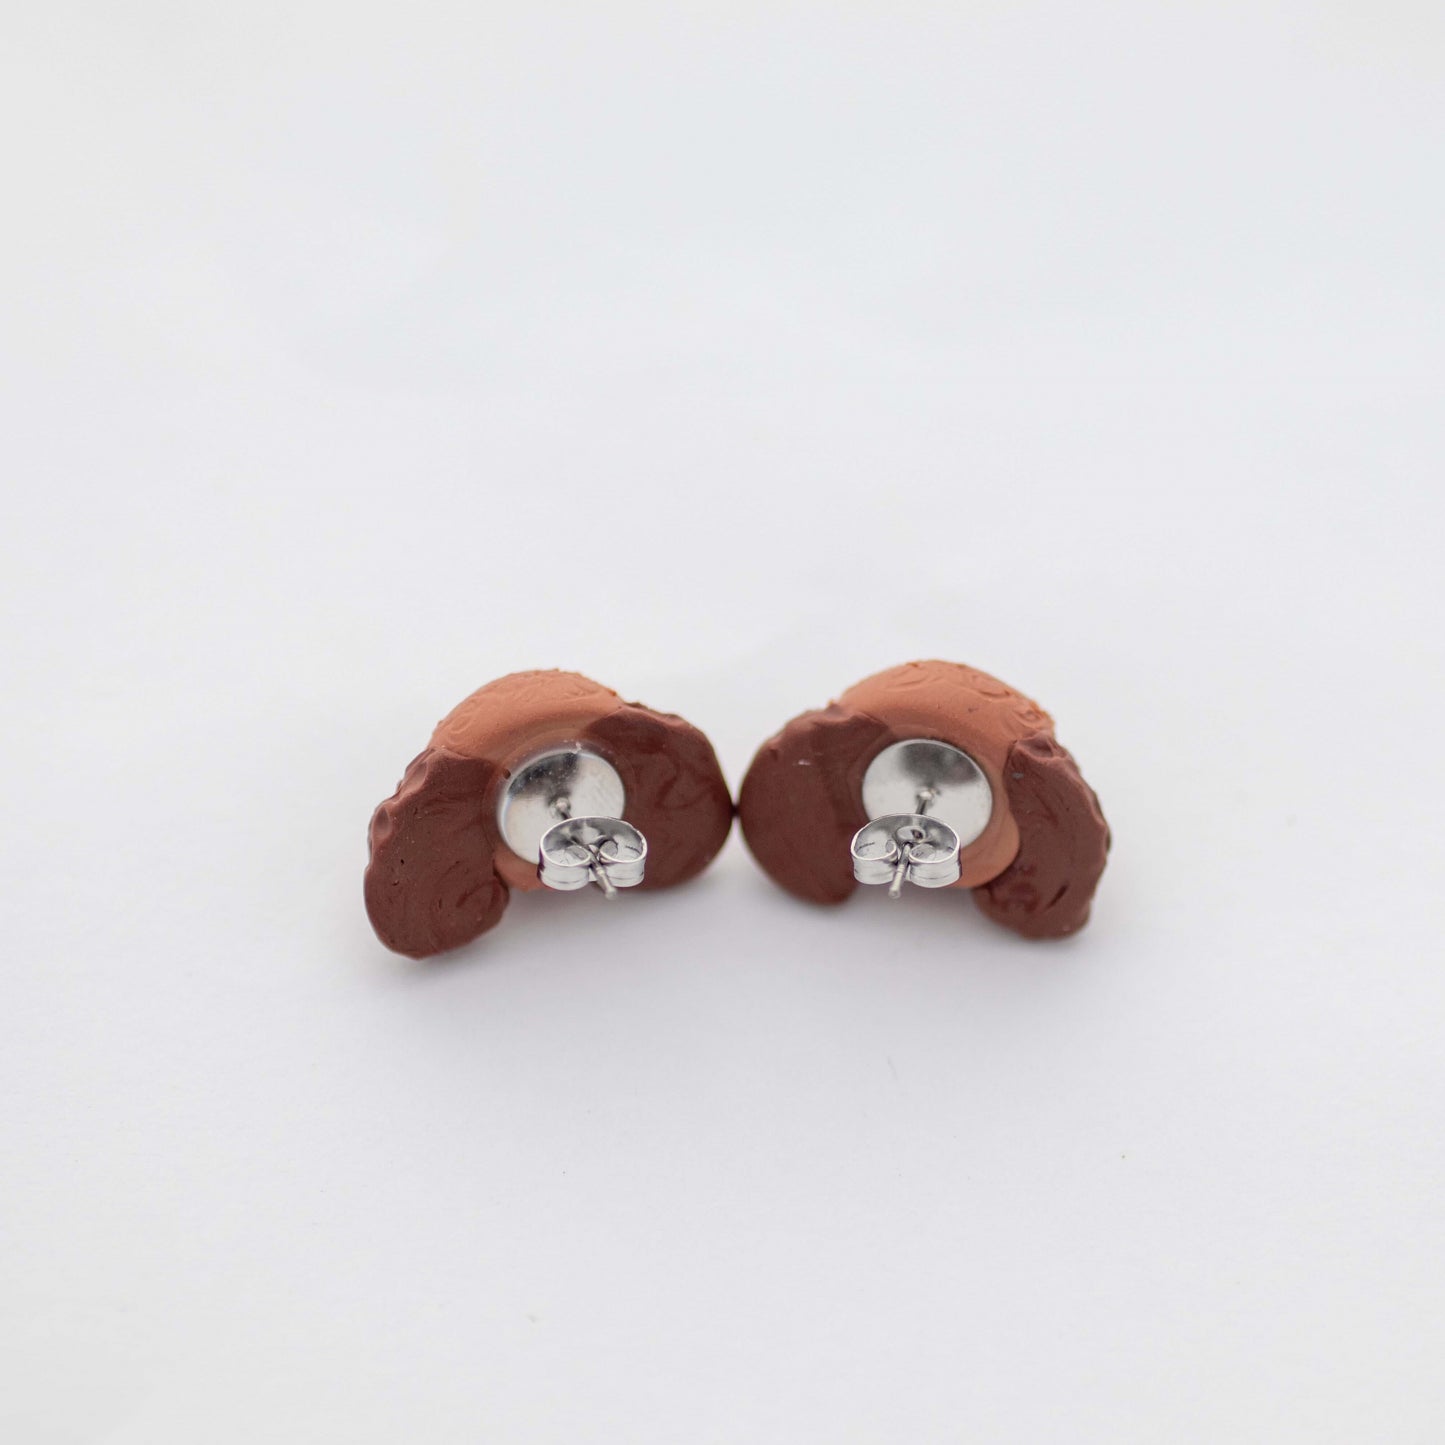 Handmade polymer clay Cavoodle stud earrings showing surgical steel backs